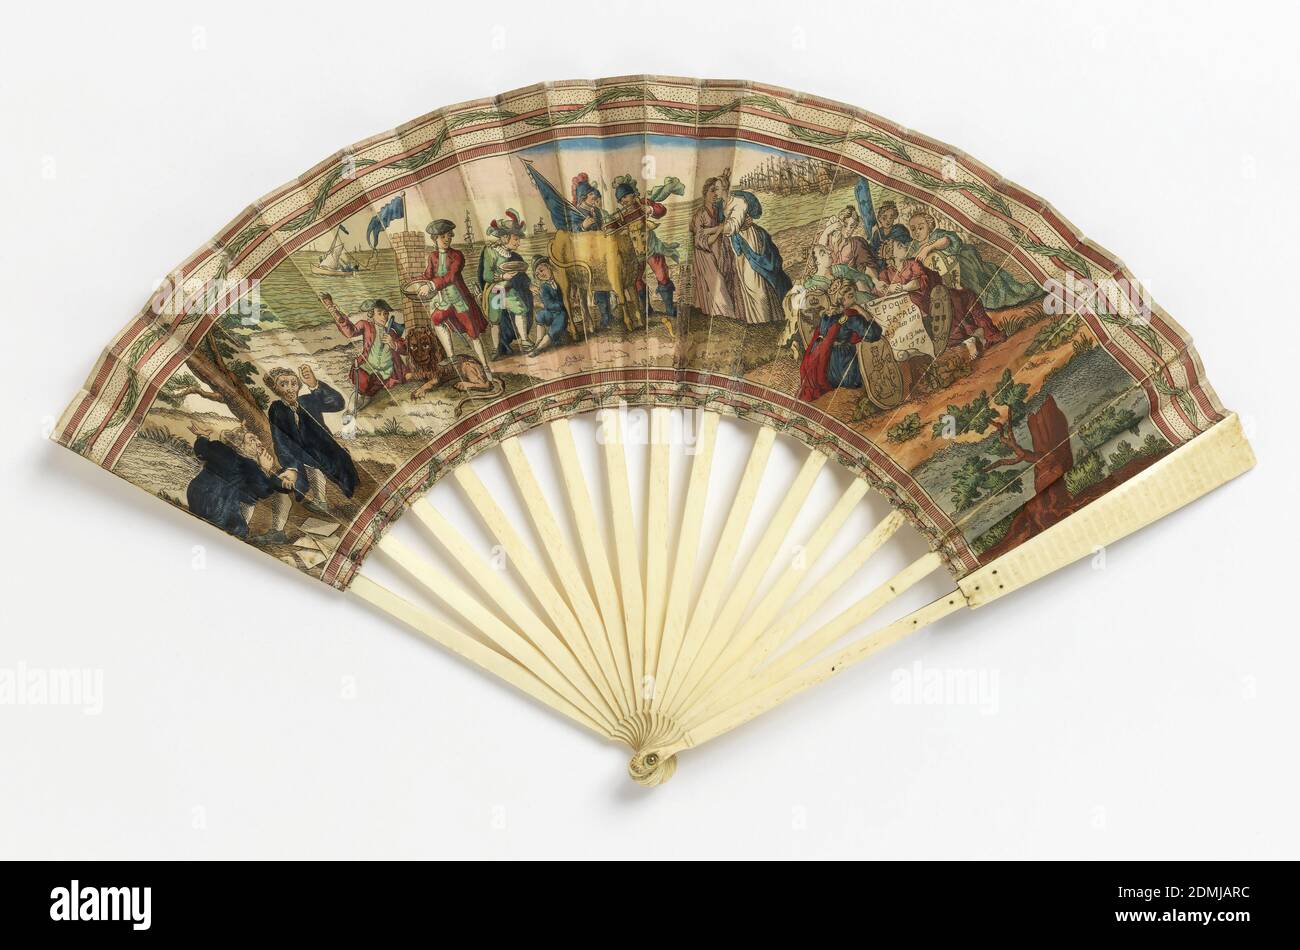 Pleated fan, Paper leaf with hand-colored etching, bone sticks, mother-of-pearl washer at the rivet, Pleated fan. Front and back leaves of hand-colored etching on paper. Obverse: a satirical depiction American separation from England, and the 1778 treaty subsequently signed between America and France. England is represented by the placid cow and the recumbent lion, tamed and controlled by the Dutch, the Spanish, and the French. At center, a group of men saw off the horns of a cow (Great Britain) while another milks her. At left, a man amputates the right paw of the British lion Stock Photo